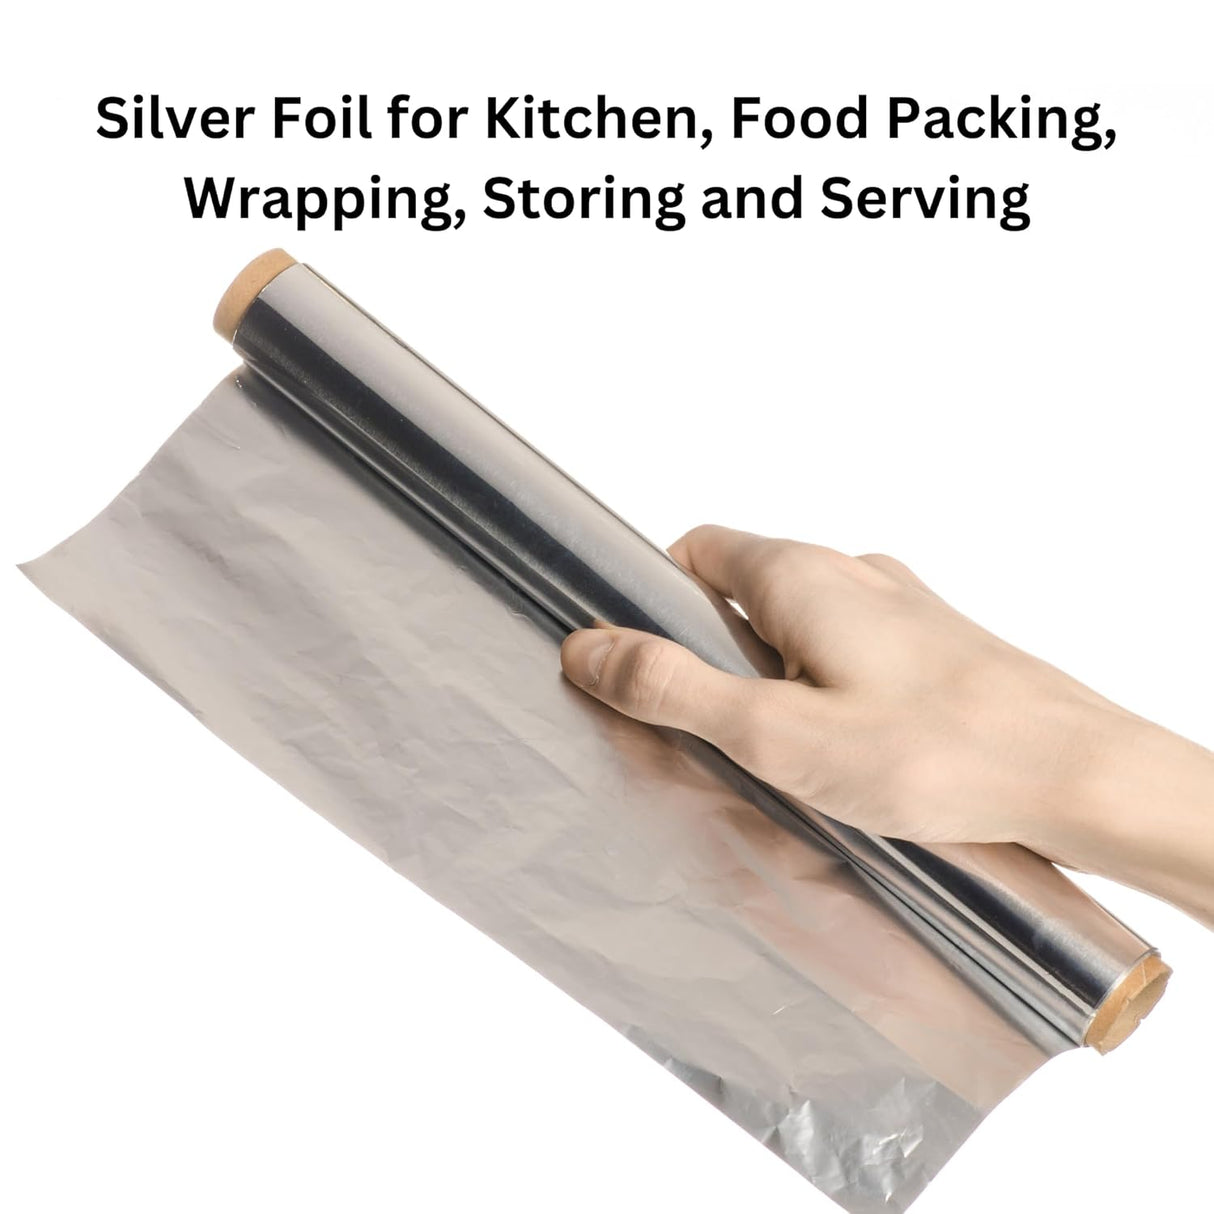 Singhal Aluminum Foil 72 Meters, 11microns | Aluminium Silver Foil for Kitchen, Food Packing, Wrapping, Storing and Serving (18 Mtr x Pack of 4)